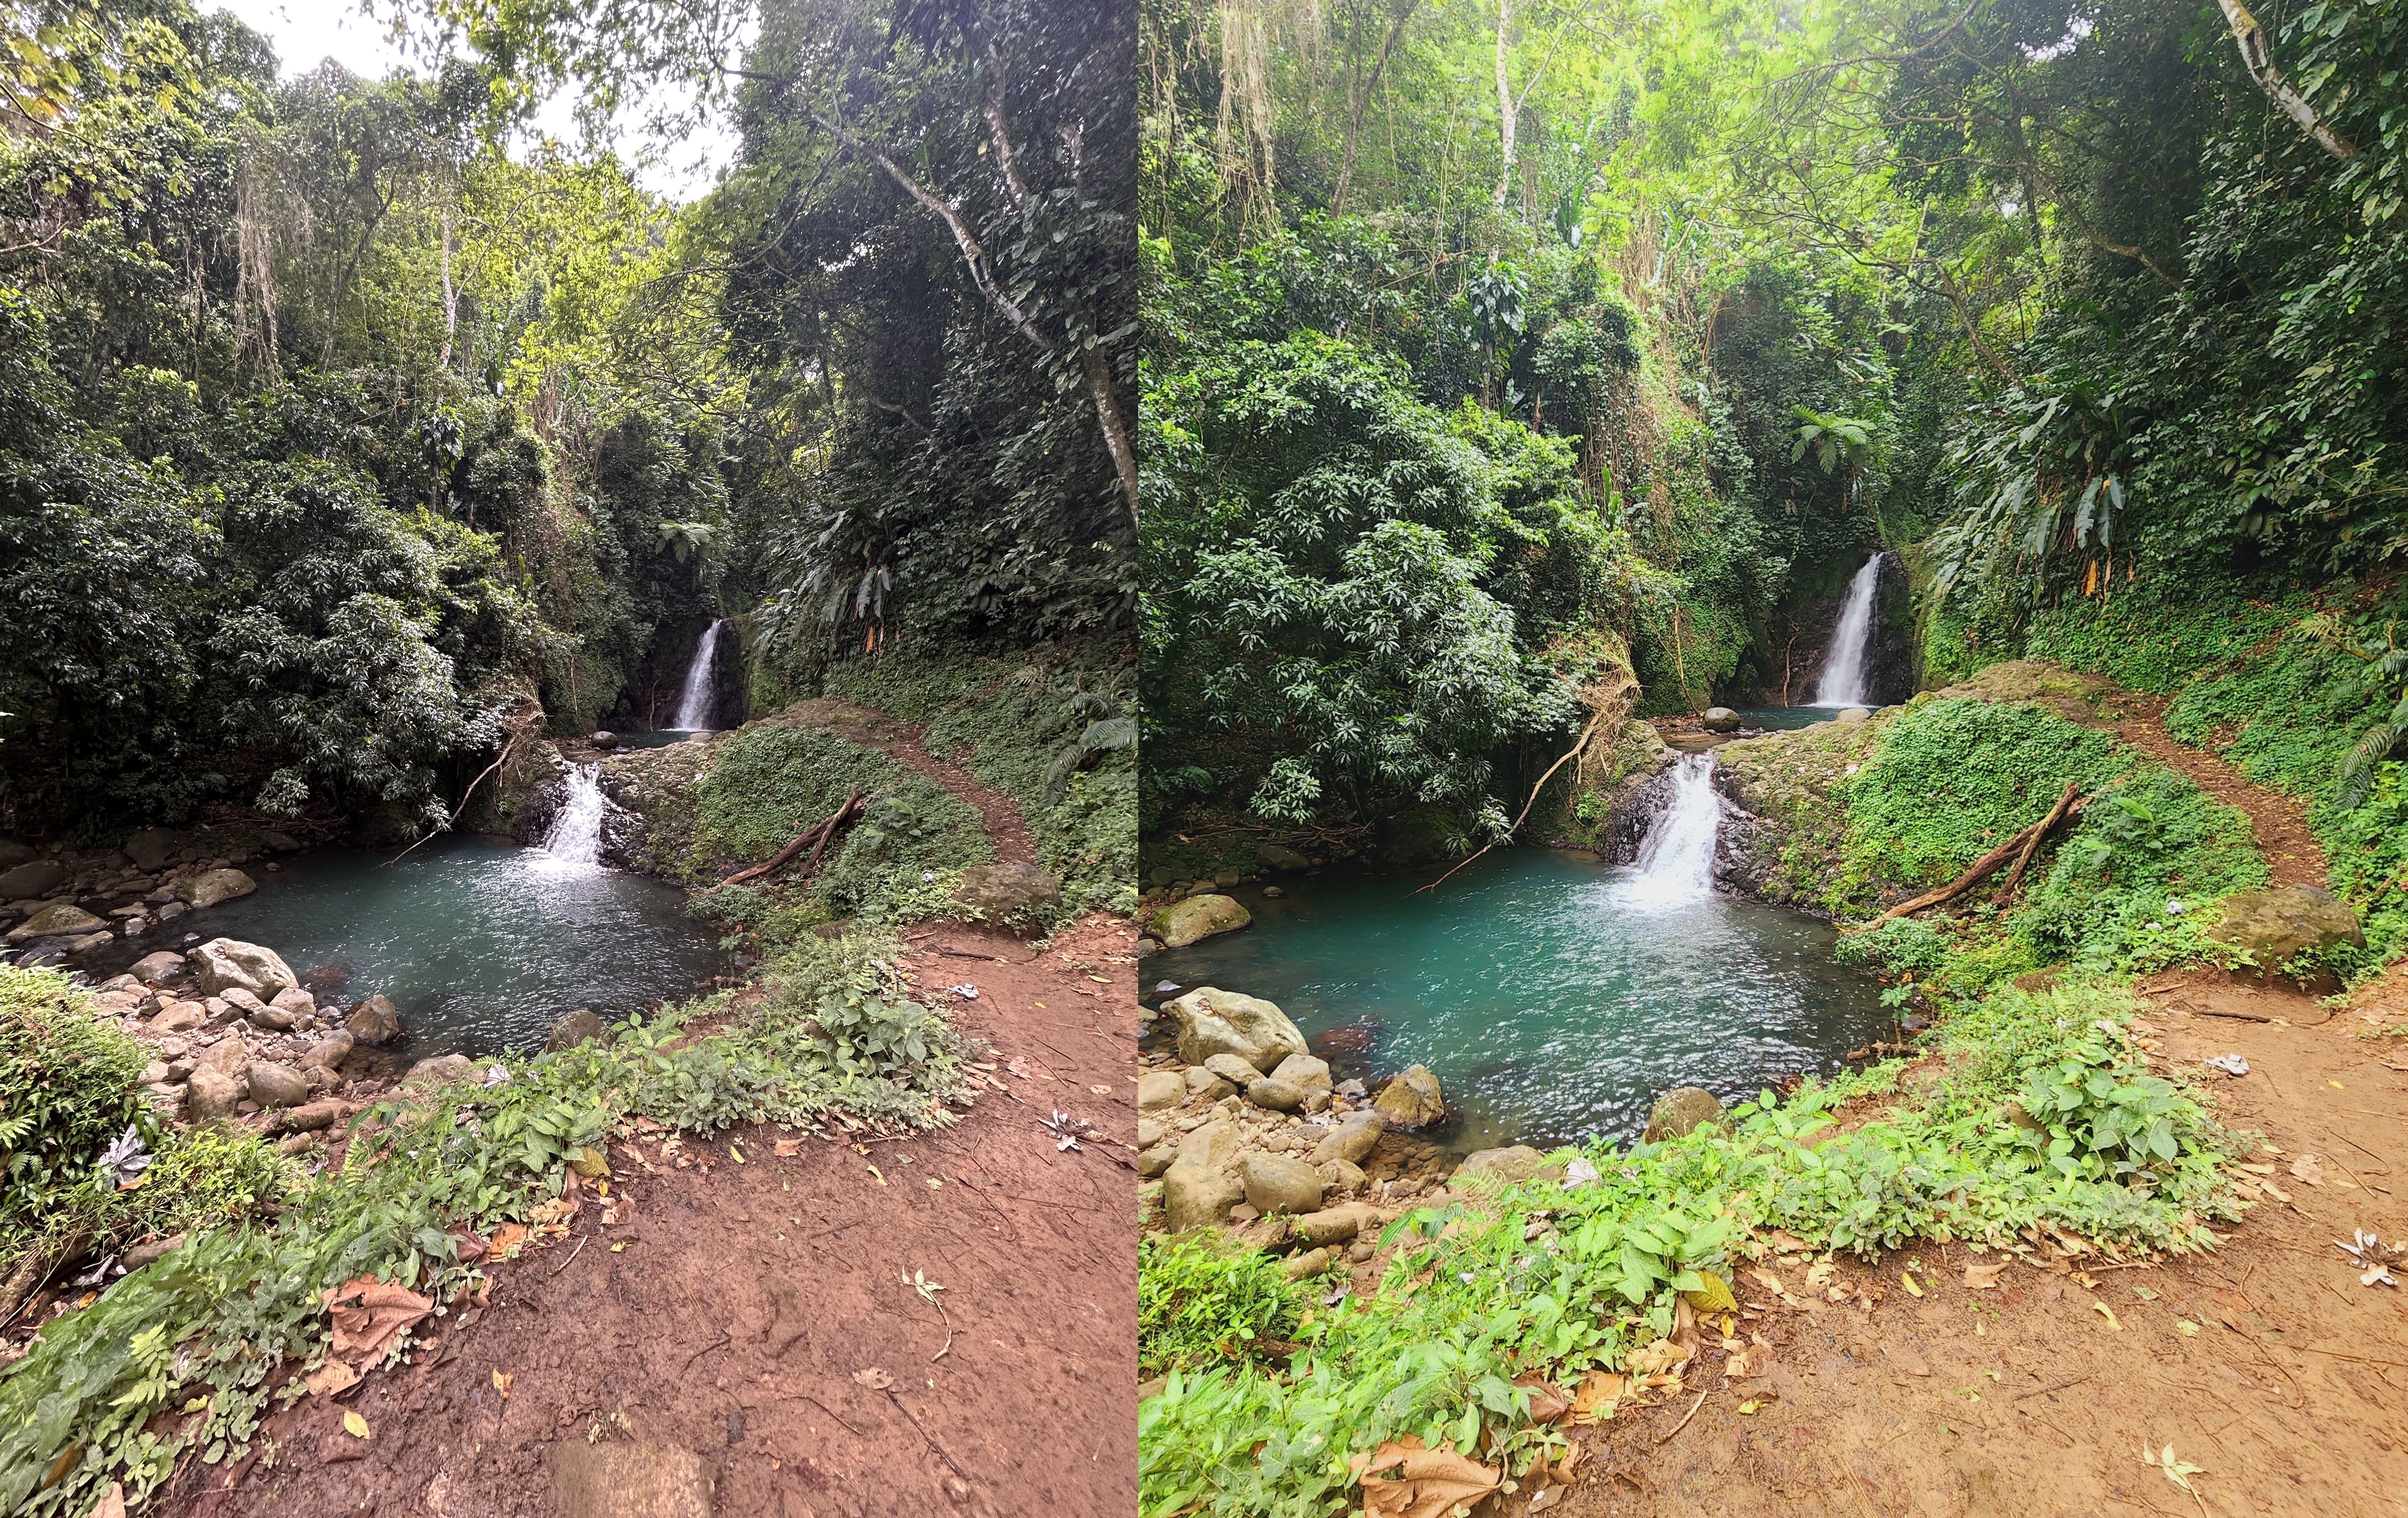 DELA DISCOUNT yzczBCixGpcm6pjf4nbMBU I took the iPhone 14 Plus with me to Grenada — did its photos convince me to ditch my Android? DELA DISCOUNT  